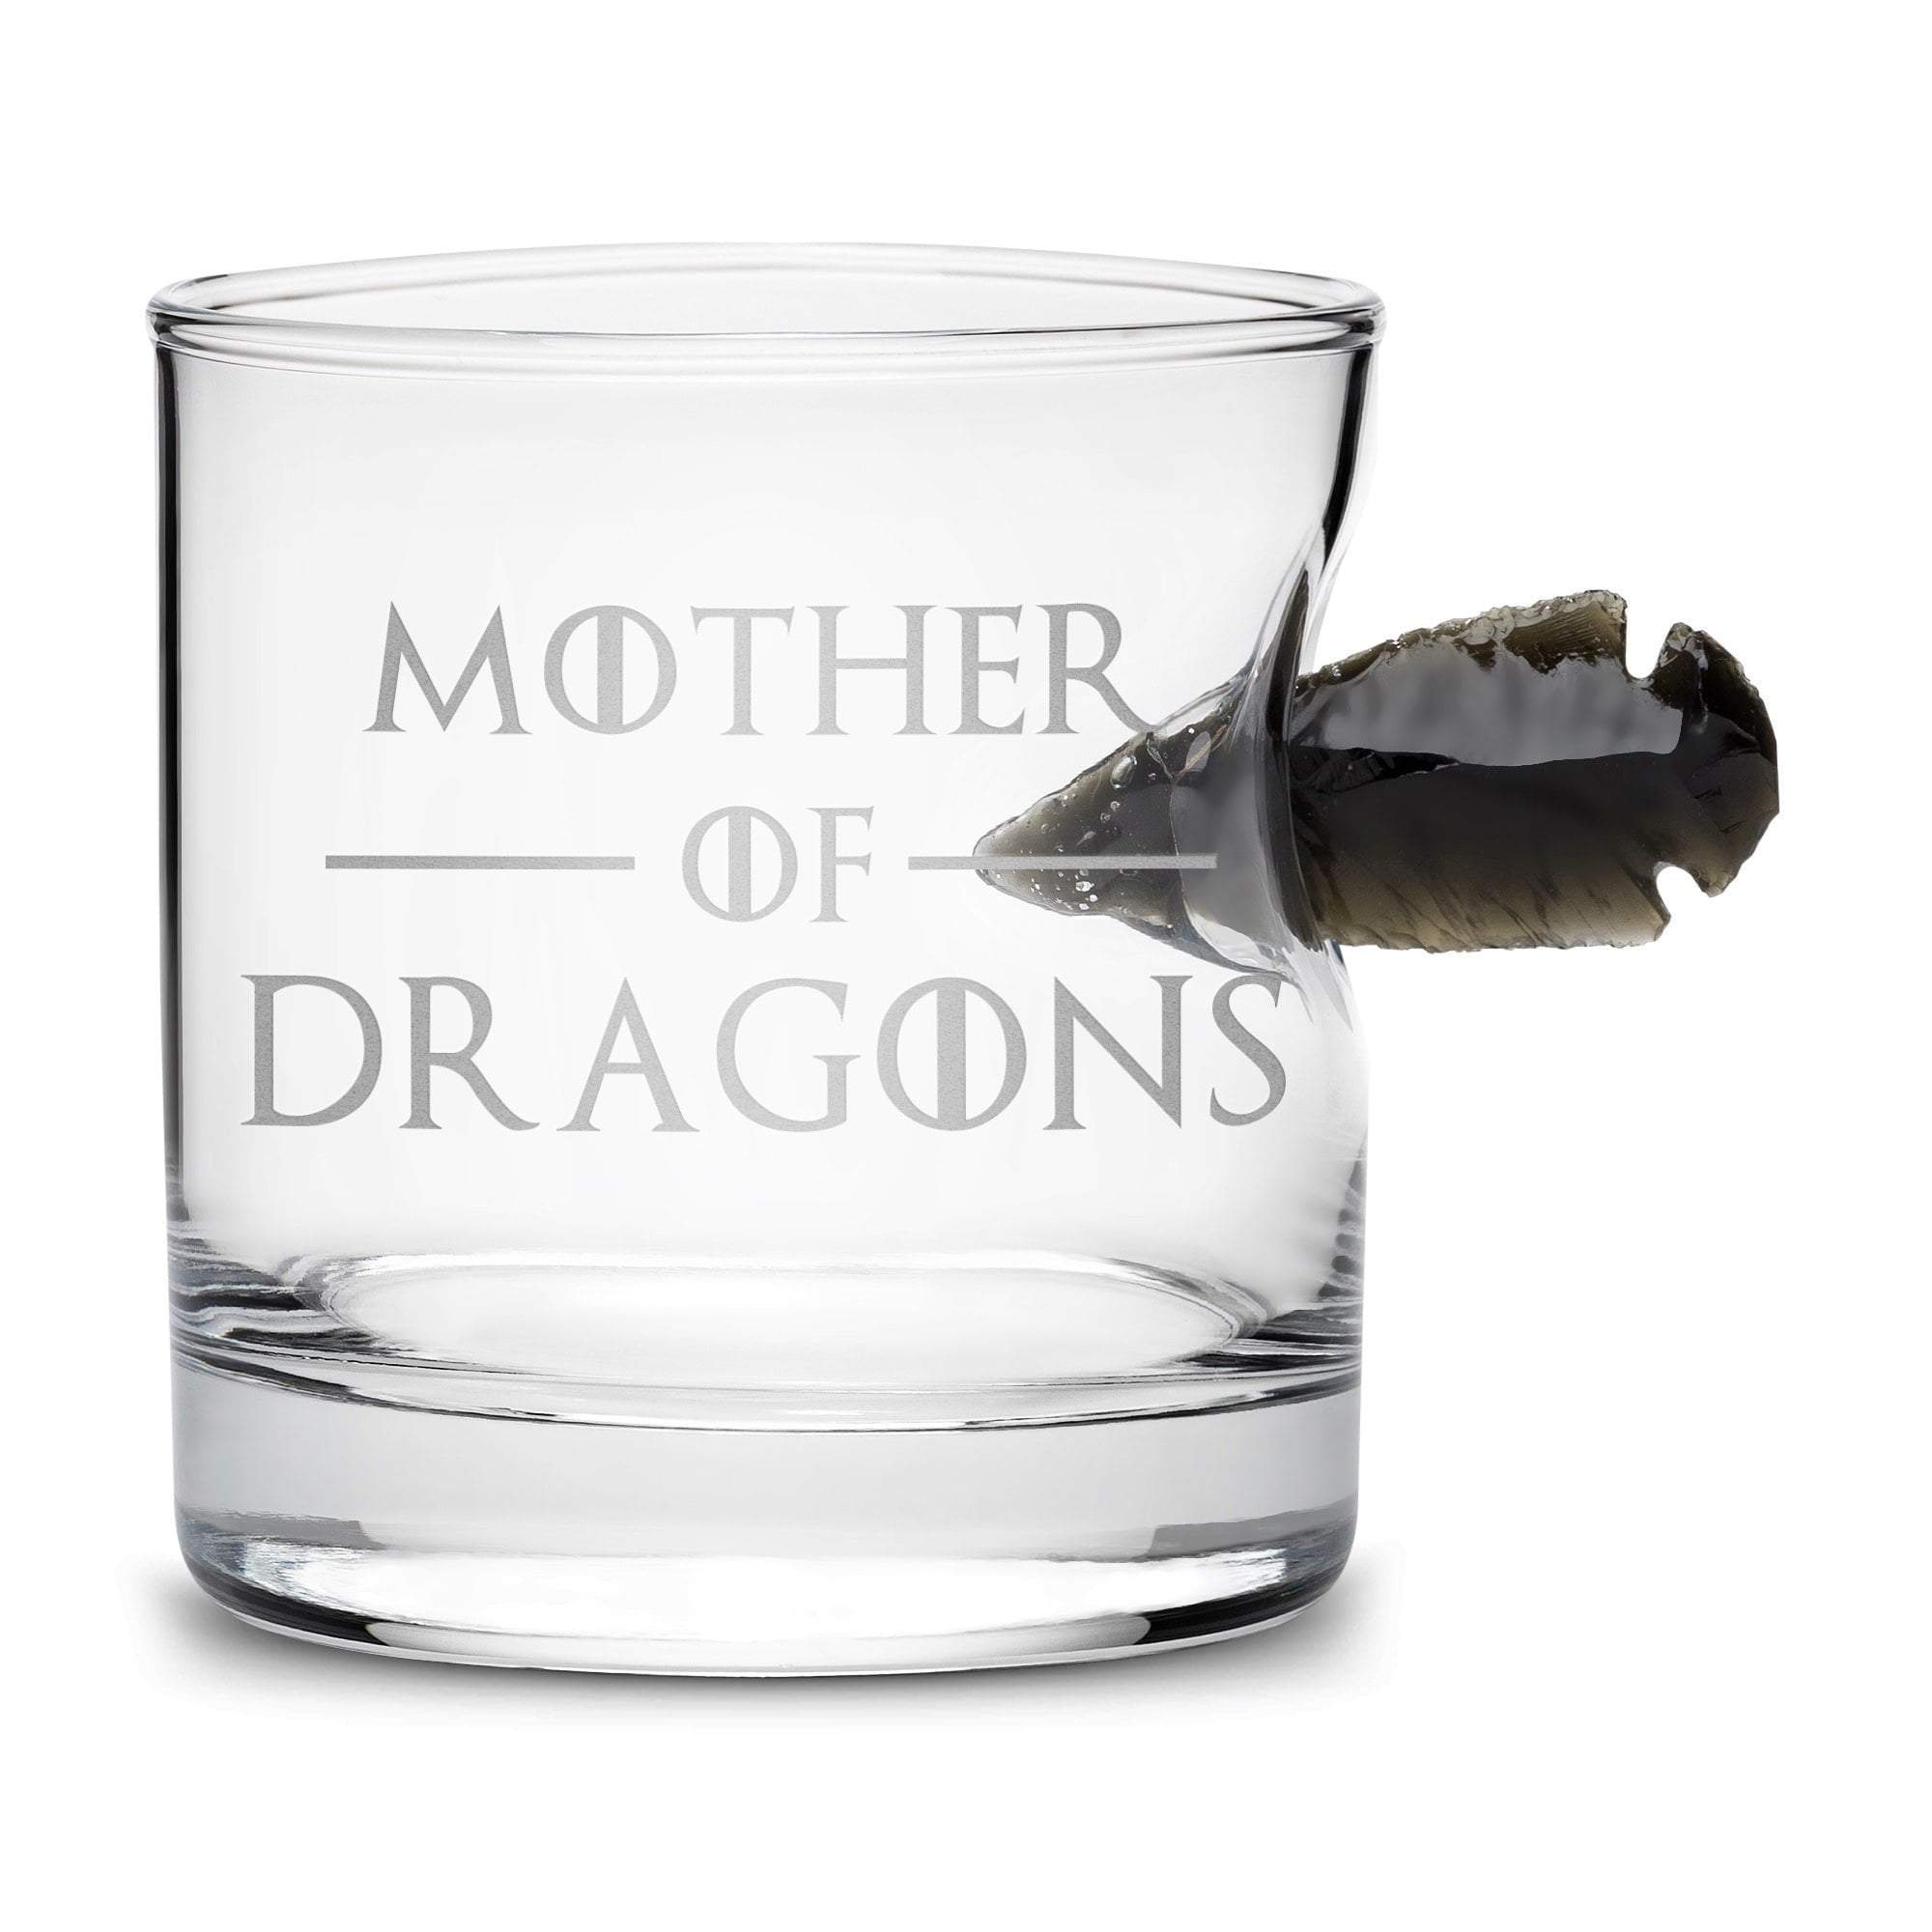 Limited Edition Game of Thrones Whiskey Dragon Glass Obsidian Arrowhead, Mother of Dragons Integrity Bottles